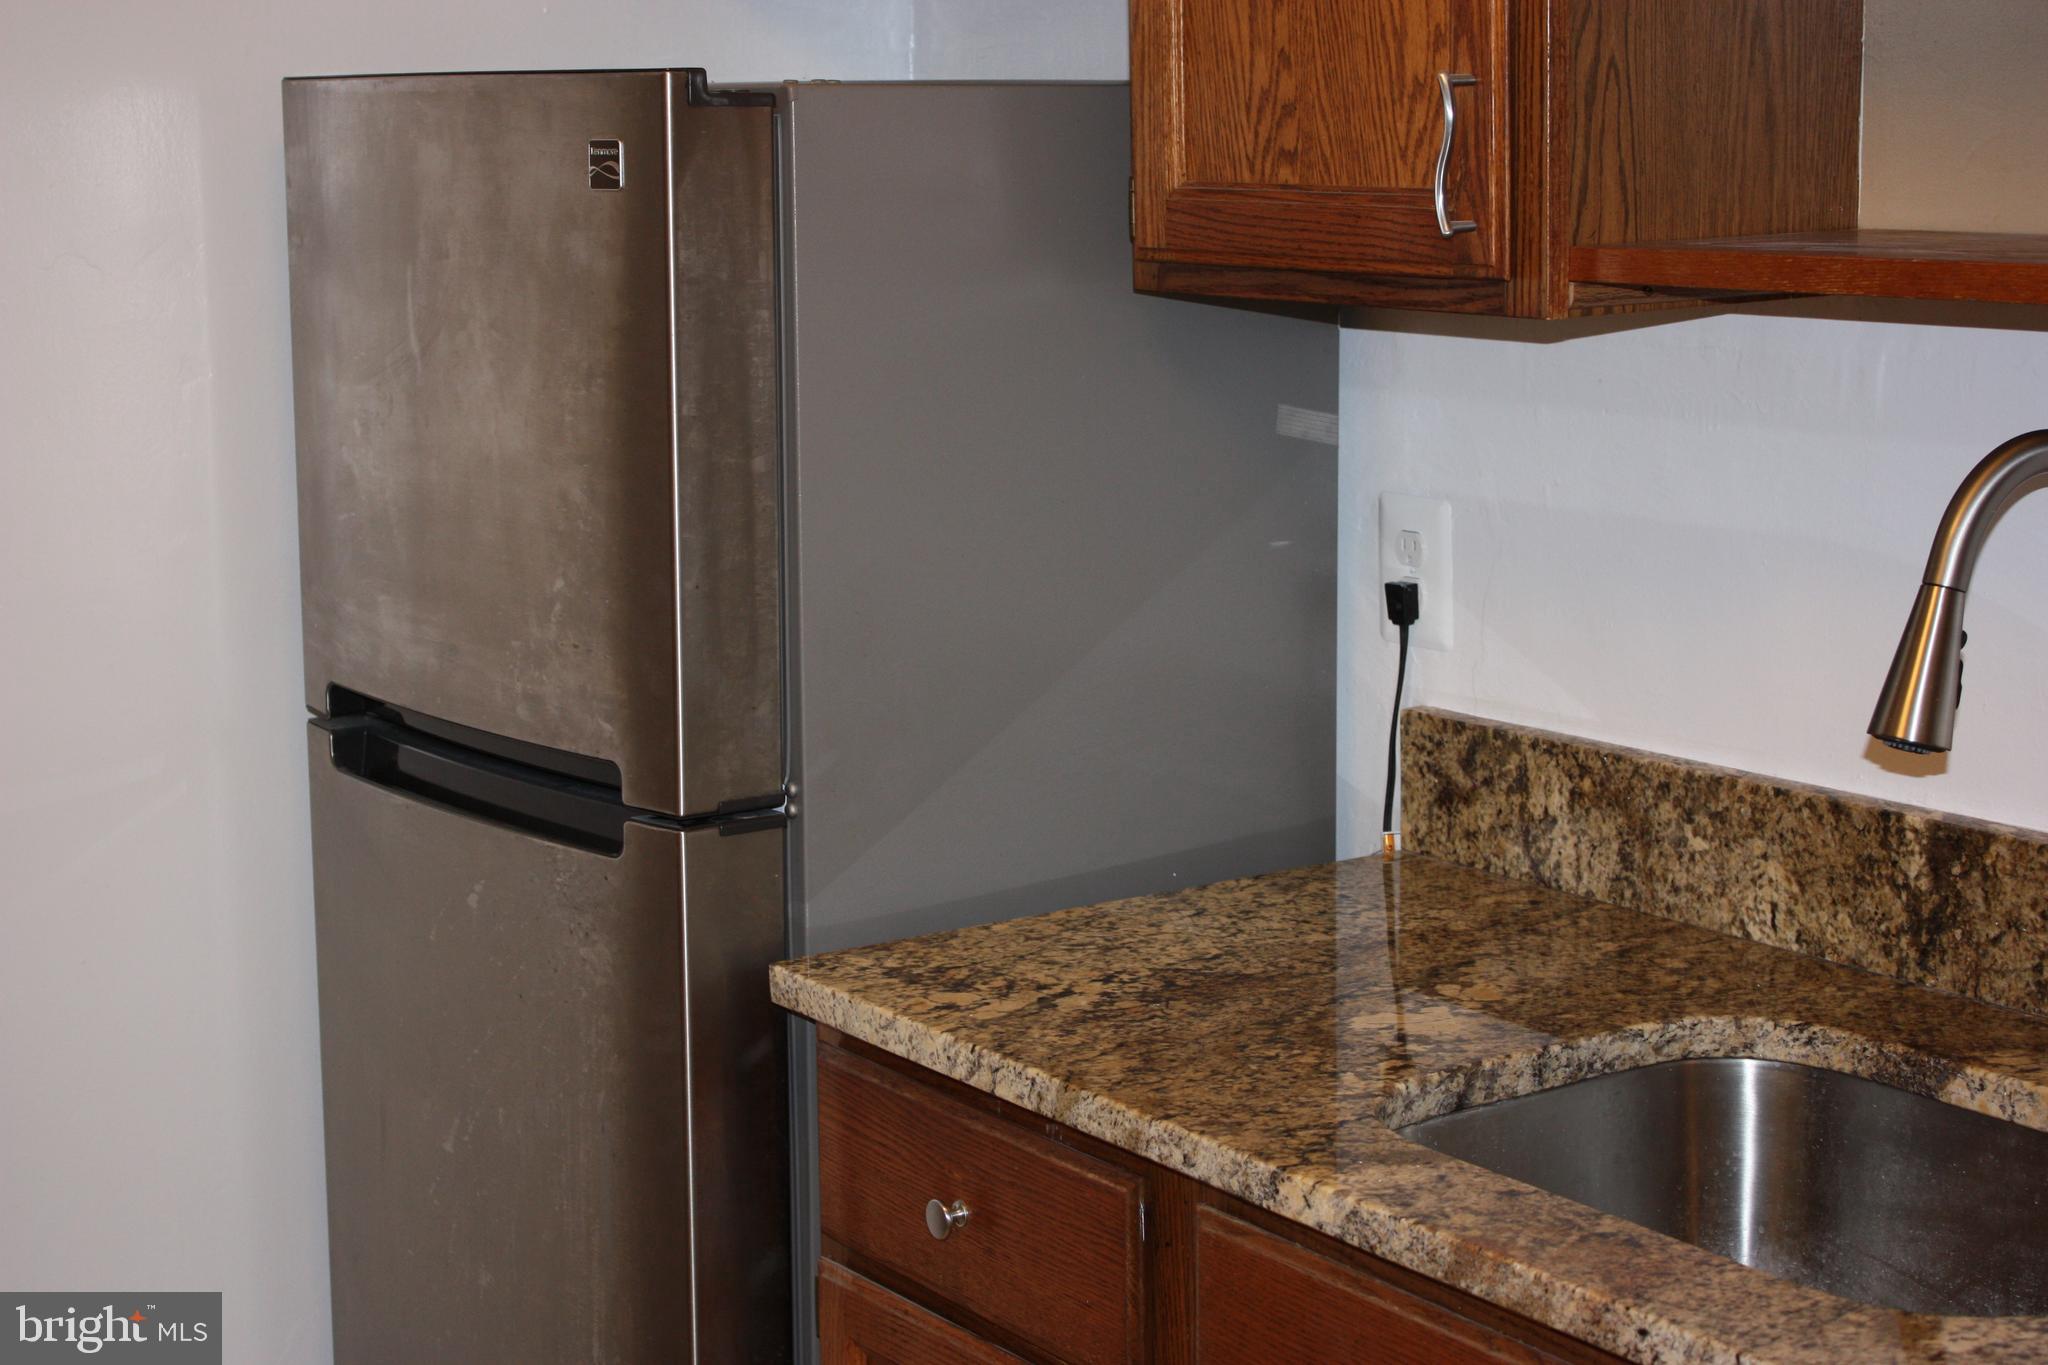 a close view of a sink and refrigerator